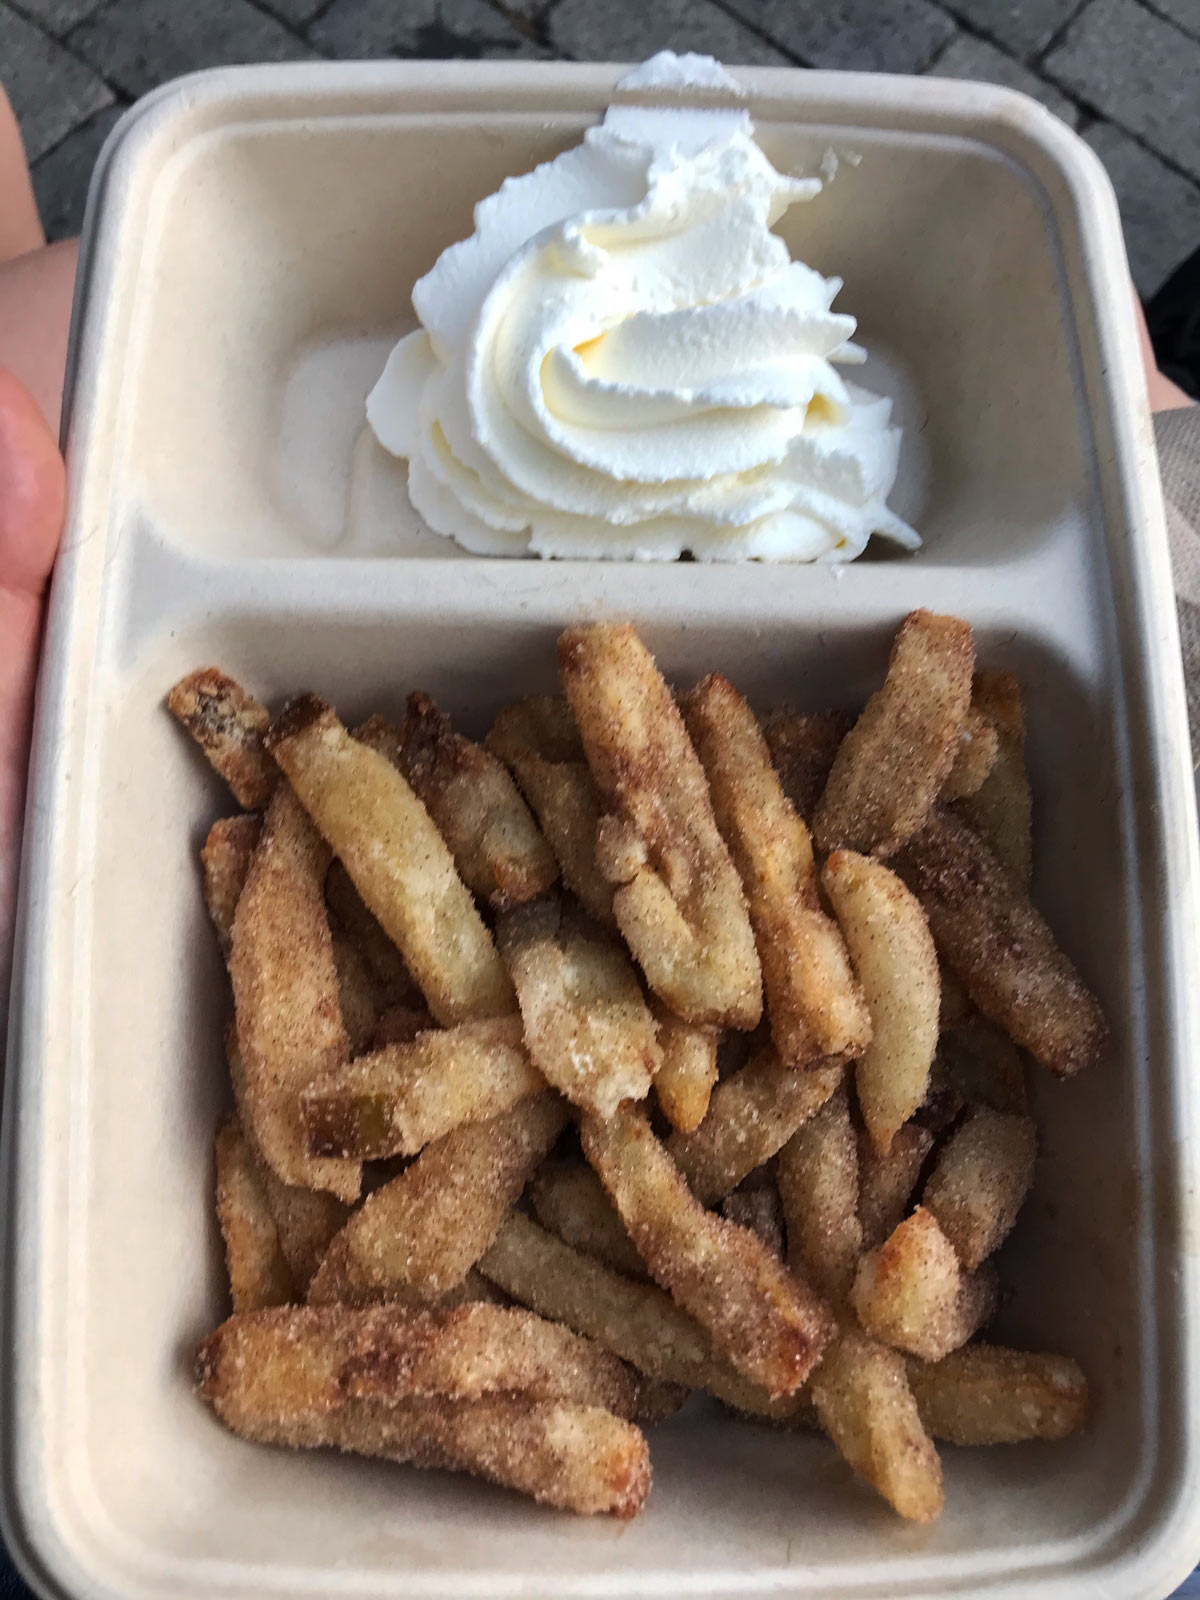 apple fries with whipped cream in box.